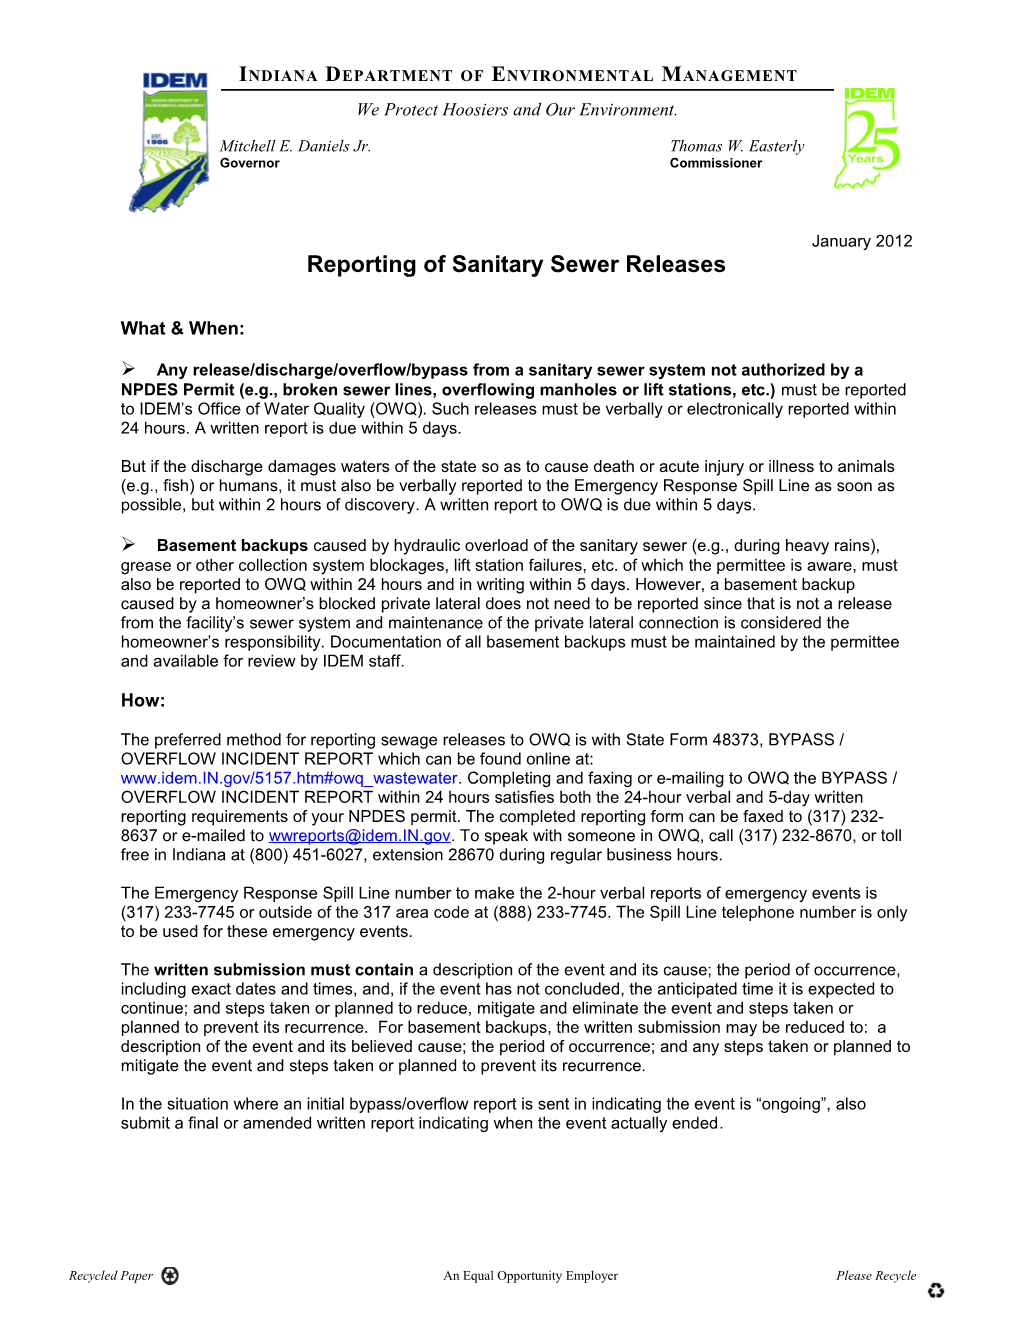 Reporting of Sanitary Sewer Releases